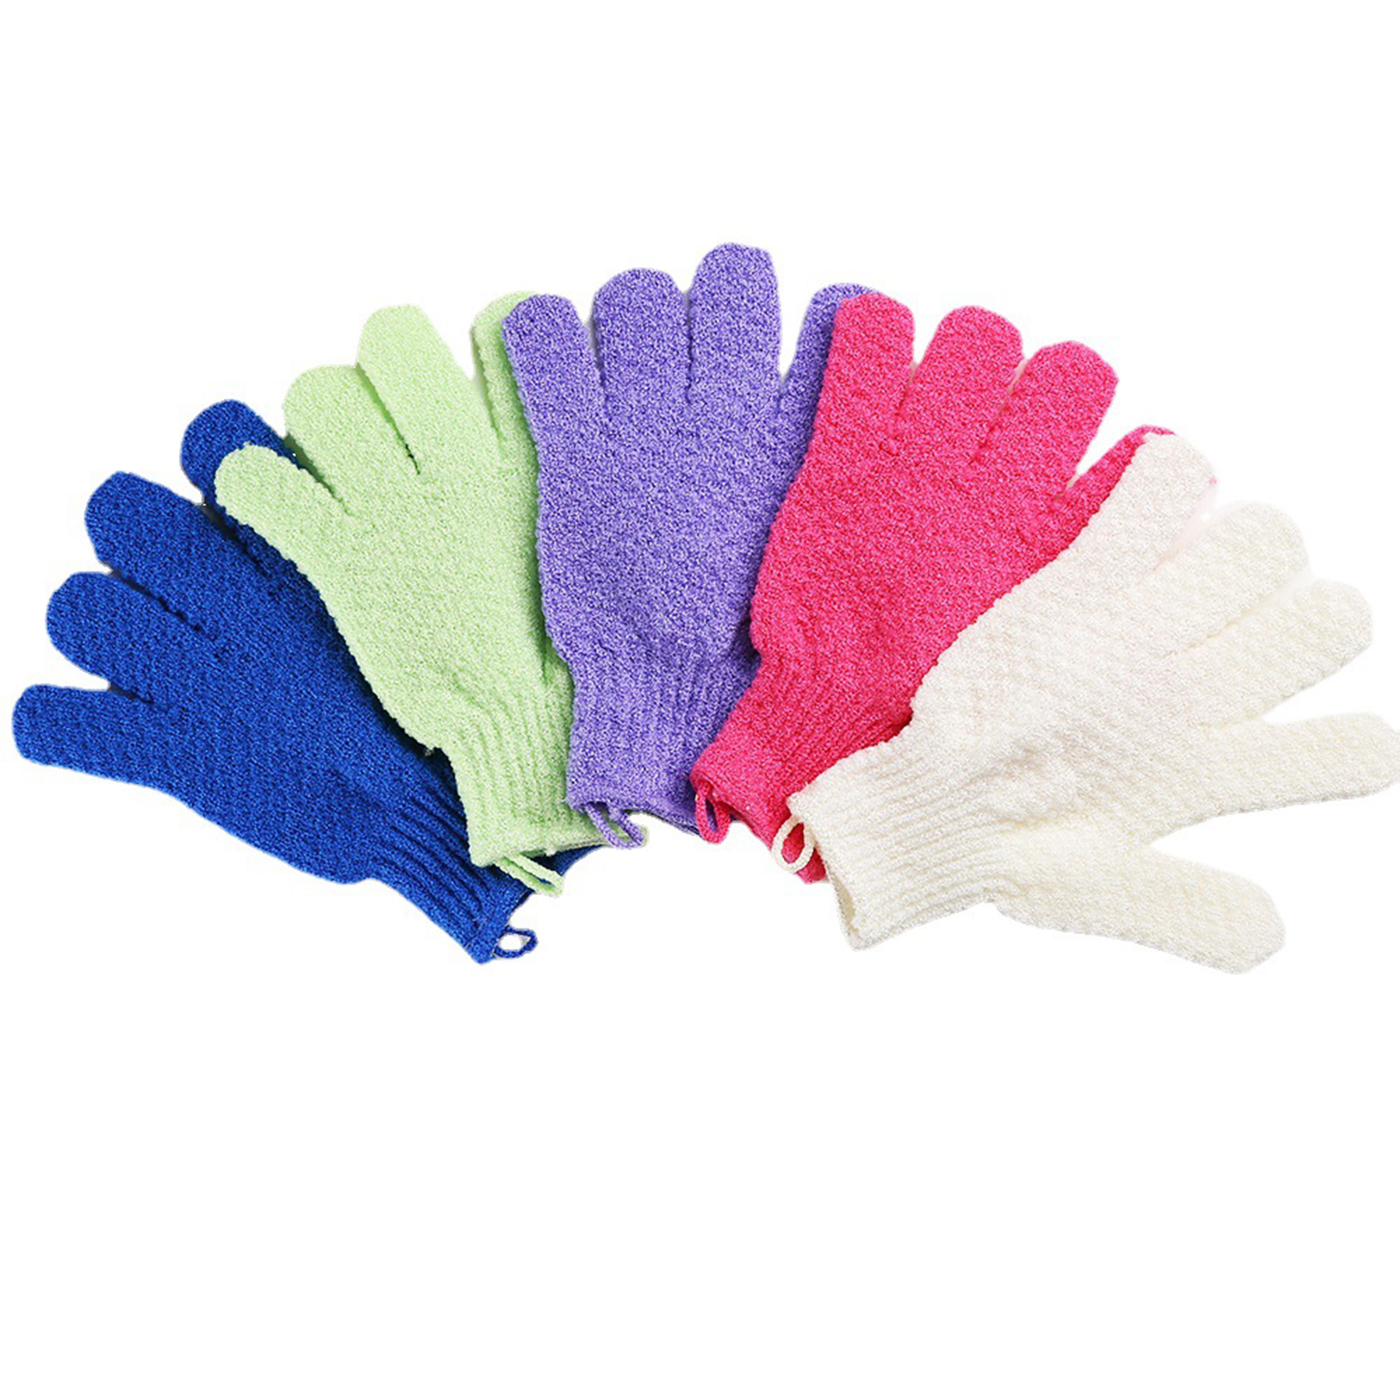 Exfoliating Shower Gloves With Hanging Loop